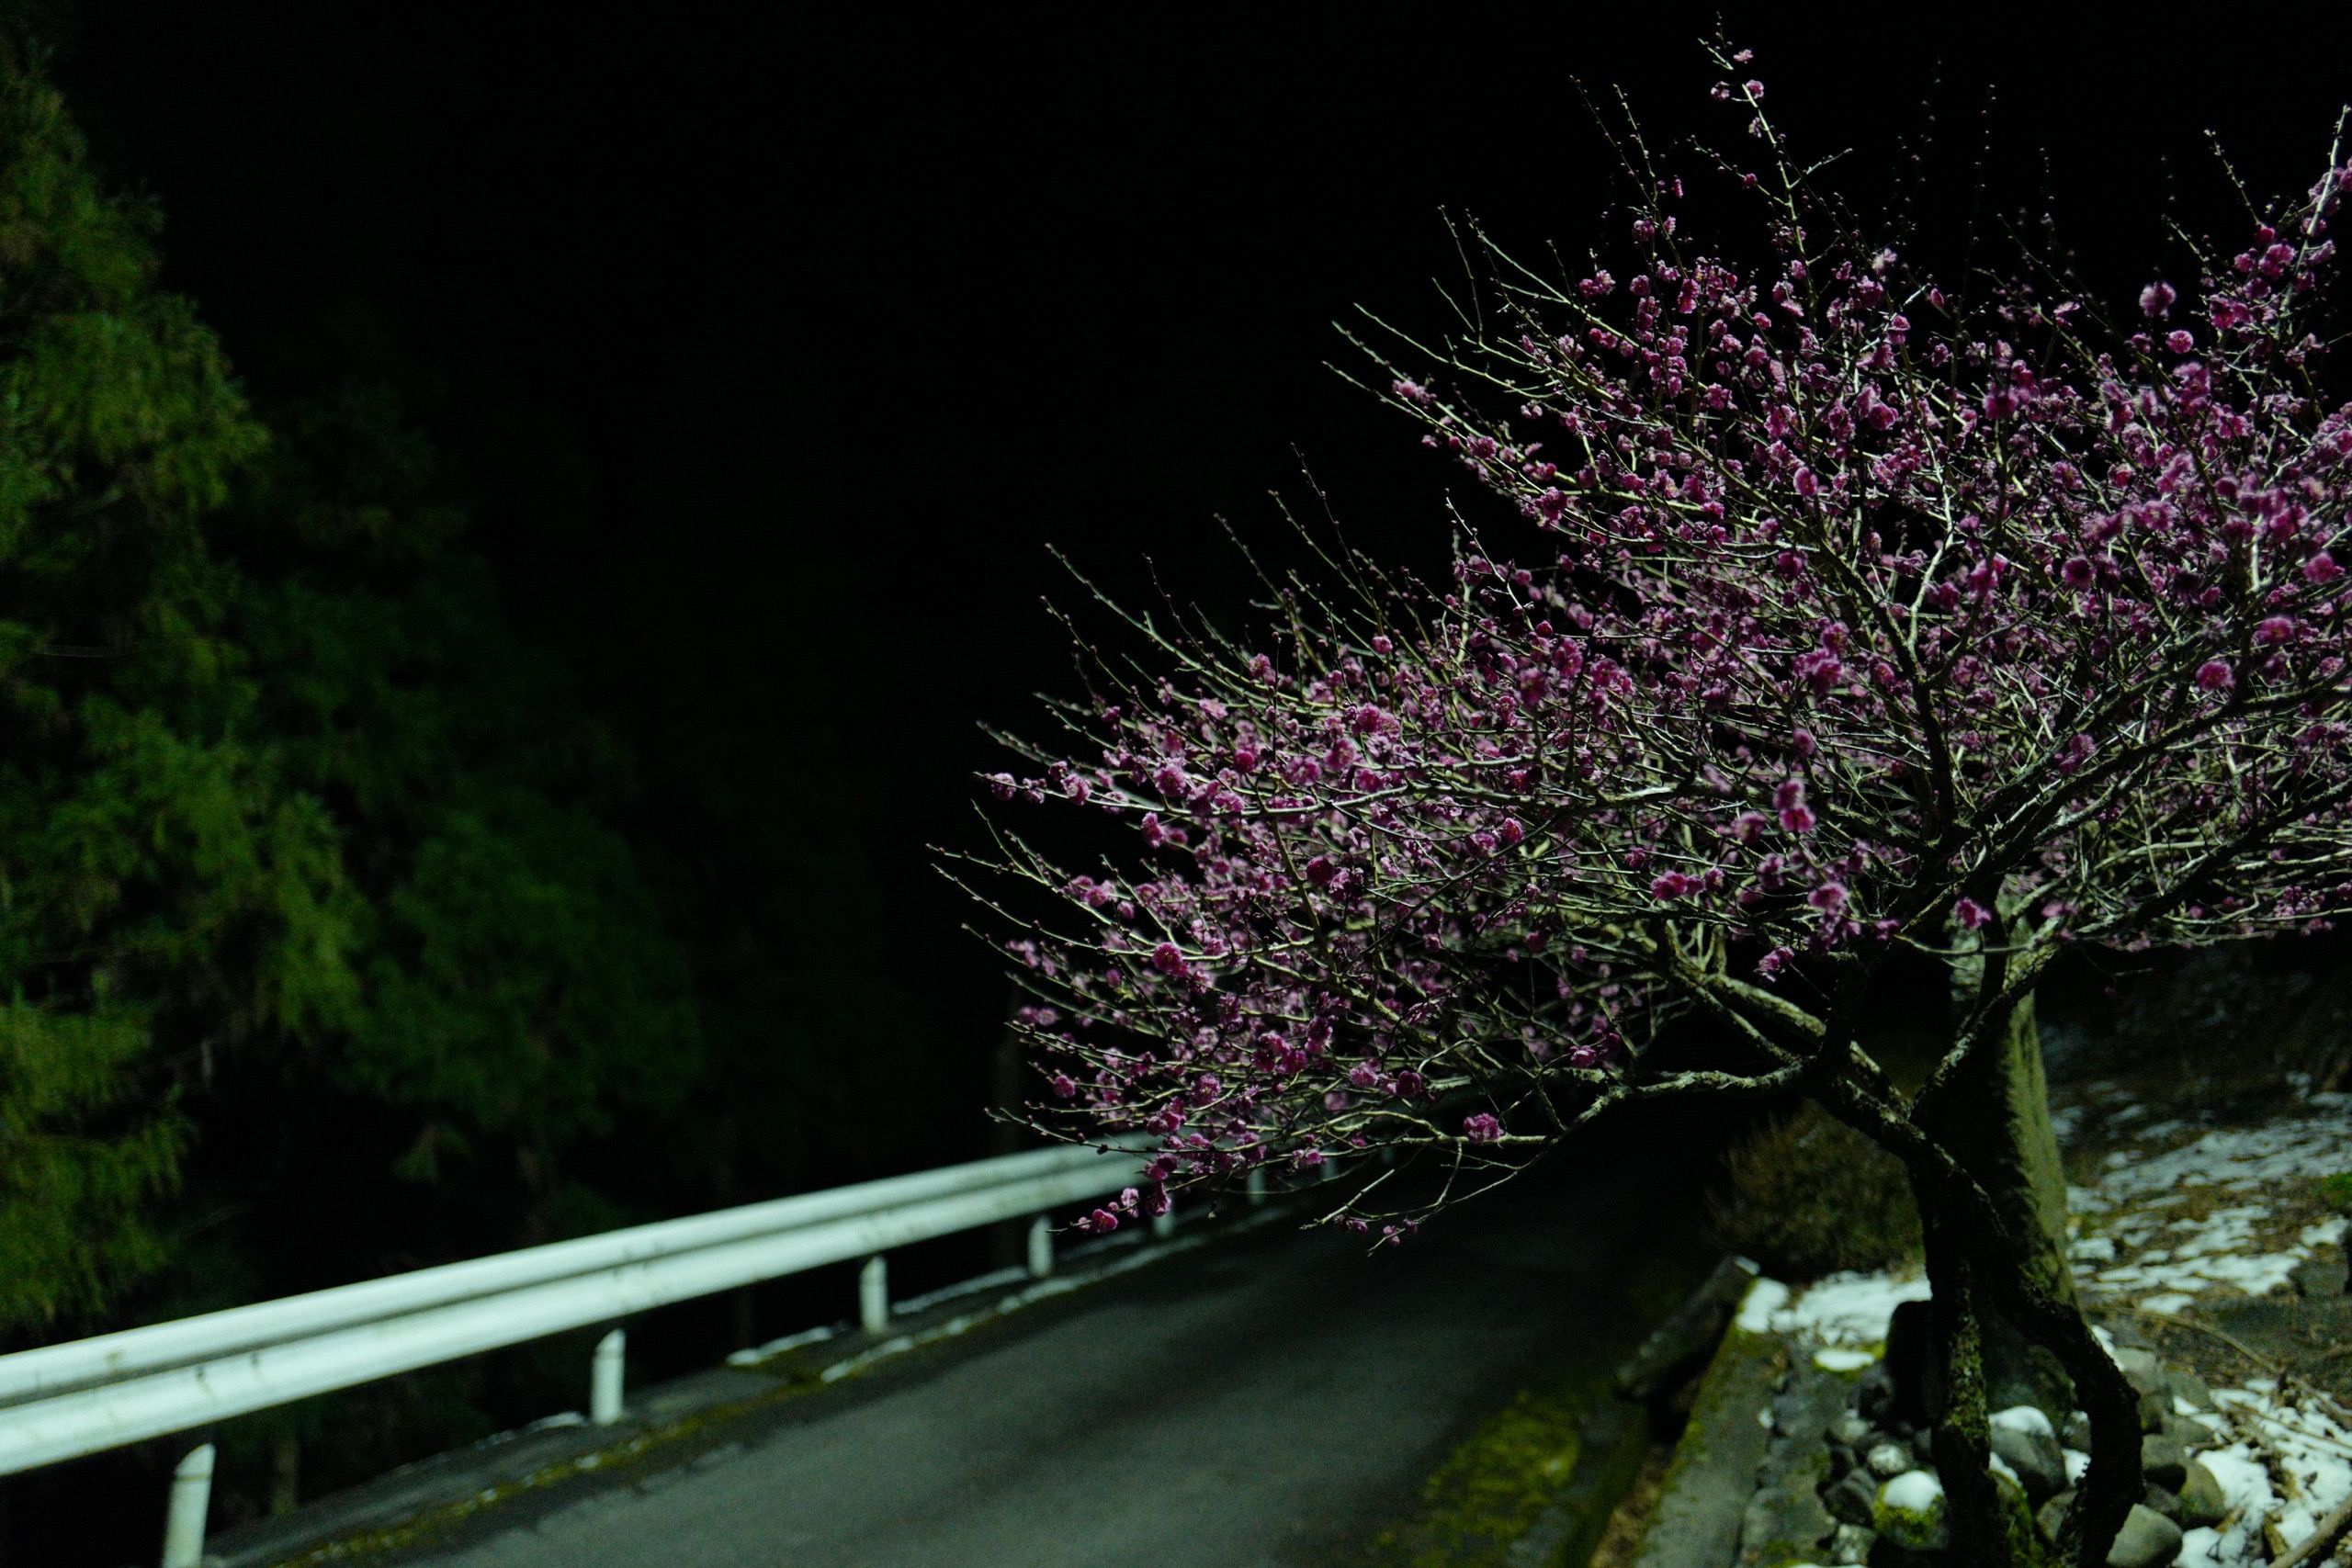 In the darkness, a plum tree is in full pink bloom while there is still snow on the ground.